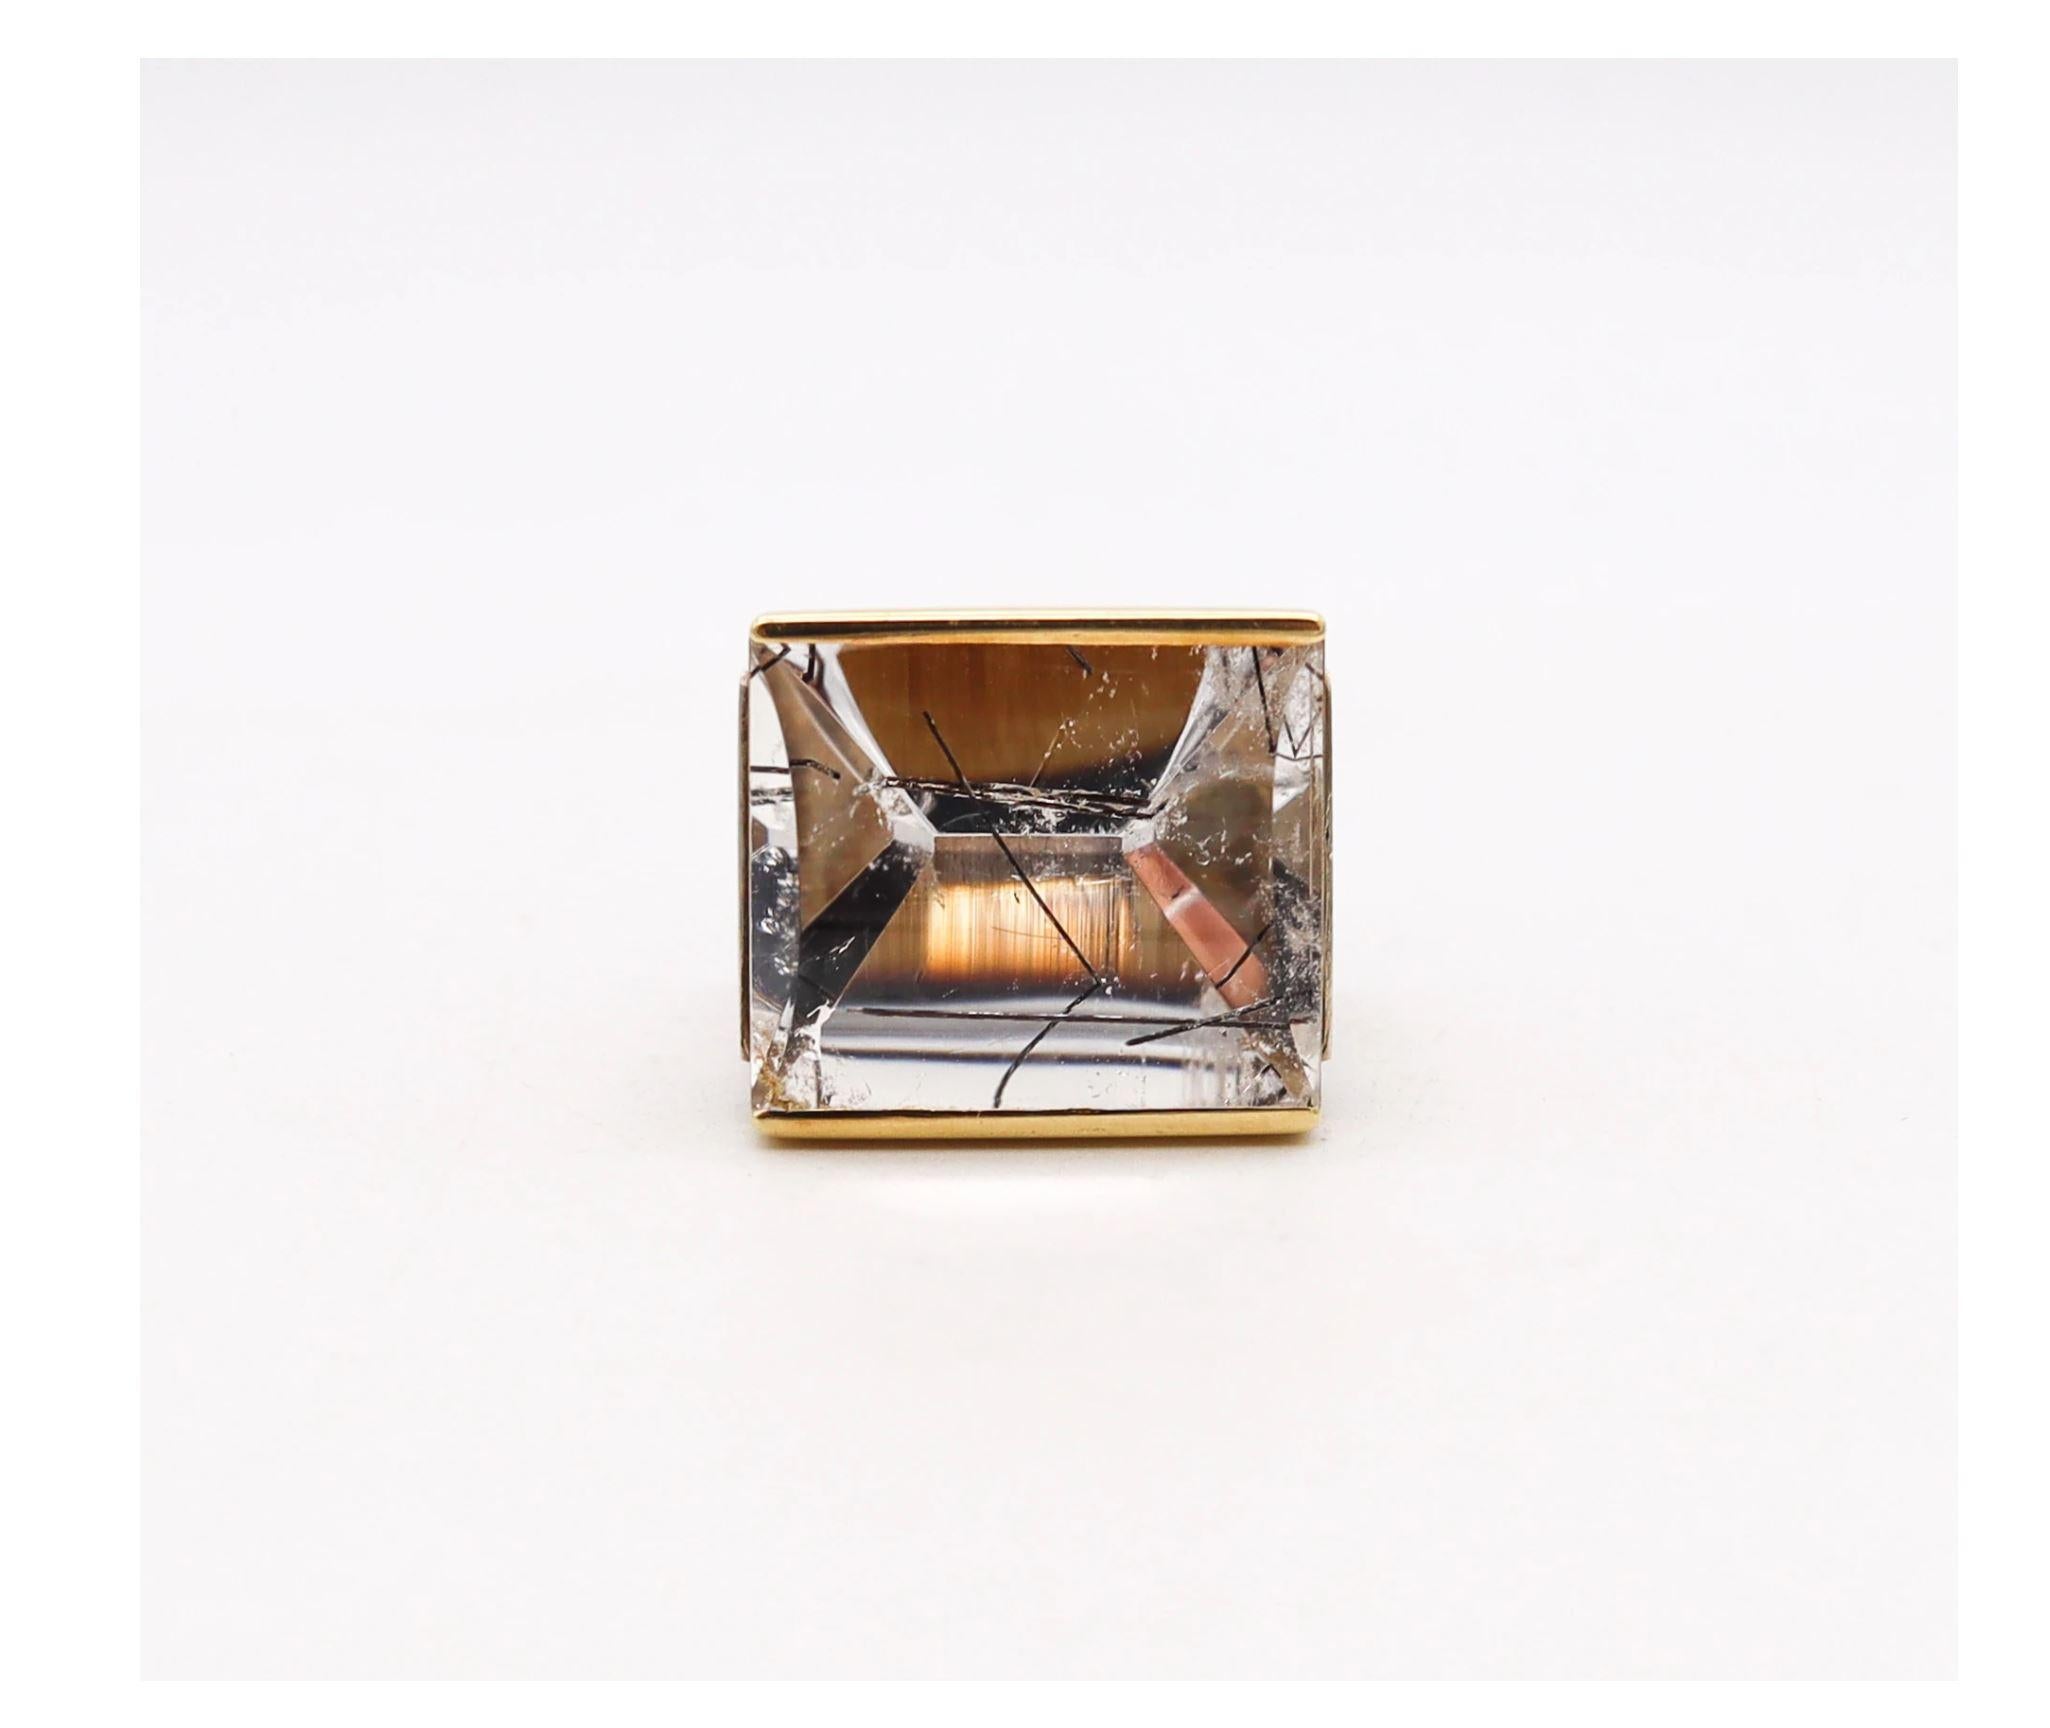 German-Swiss Bauhaus modernism squared ring

A modernism and contemporary geometric ring made in the northern Europe area, probably from Germany or Switzerland. This sculptural piece has been crafted with impeccable details in solid yellow gold of